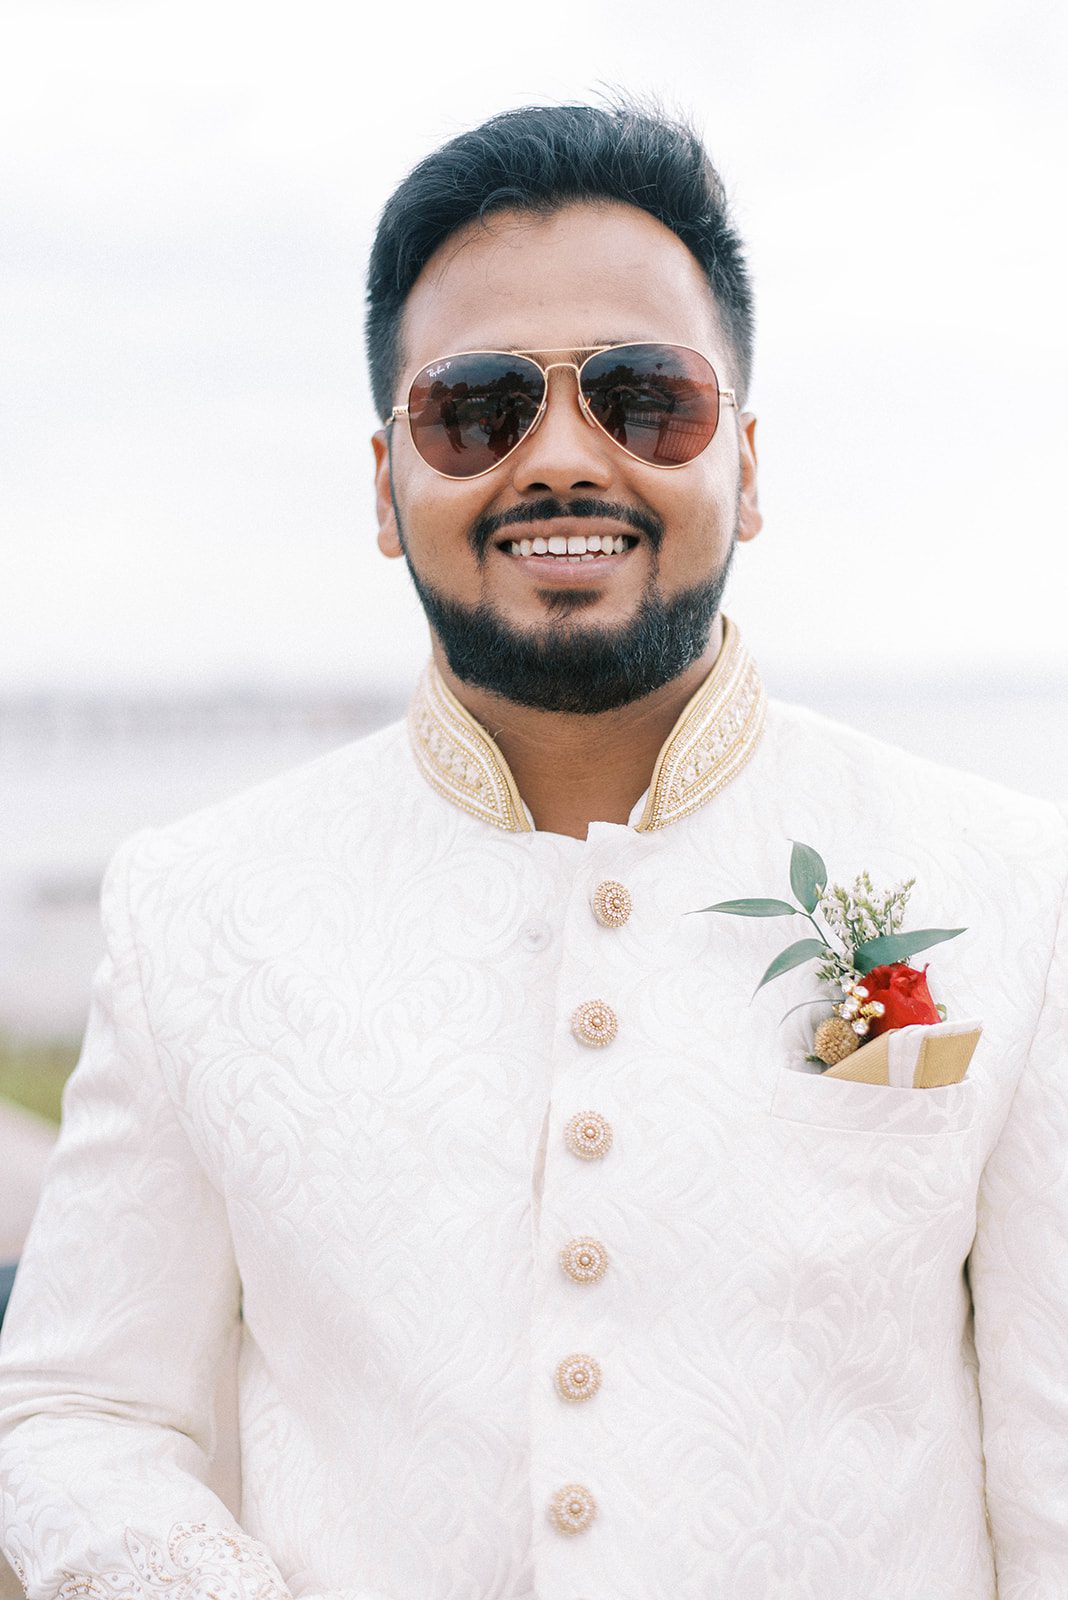 Indian groom smiling while wearing aviators and his traditional Indian wedding outfit that is white with beaded details and a red carnation in his coat pocket